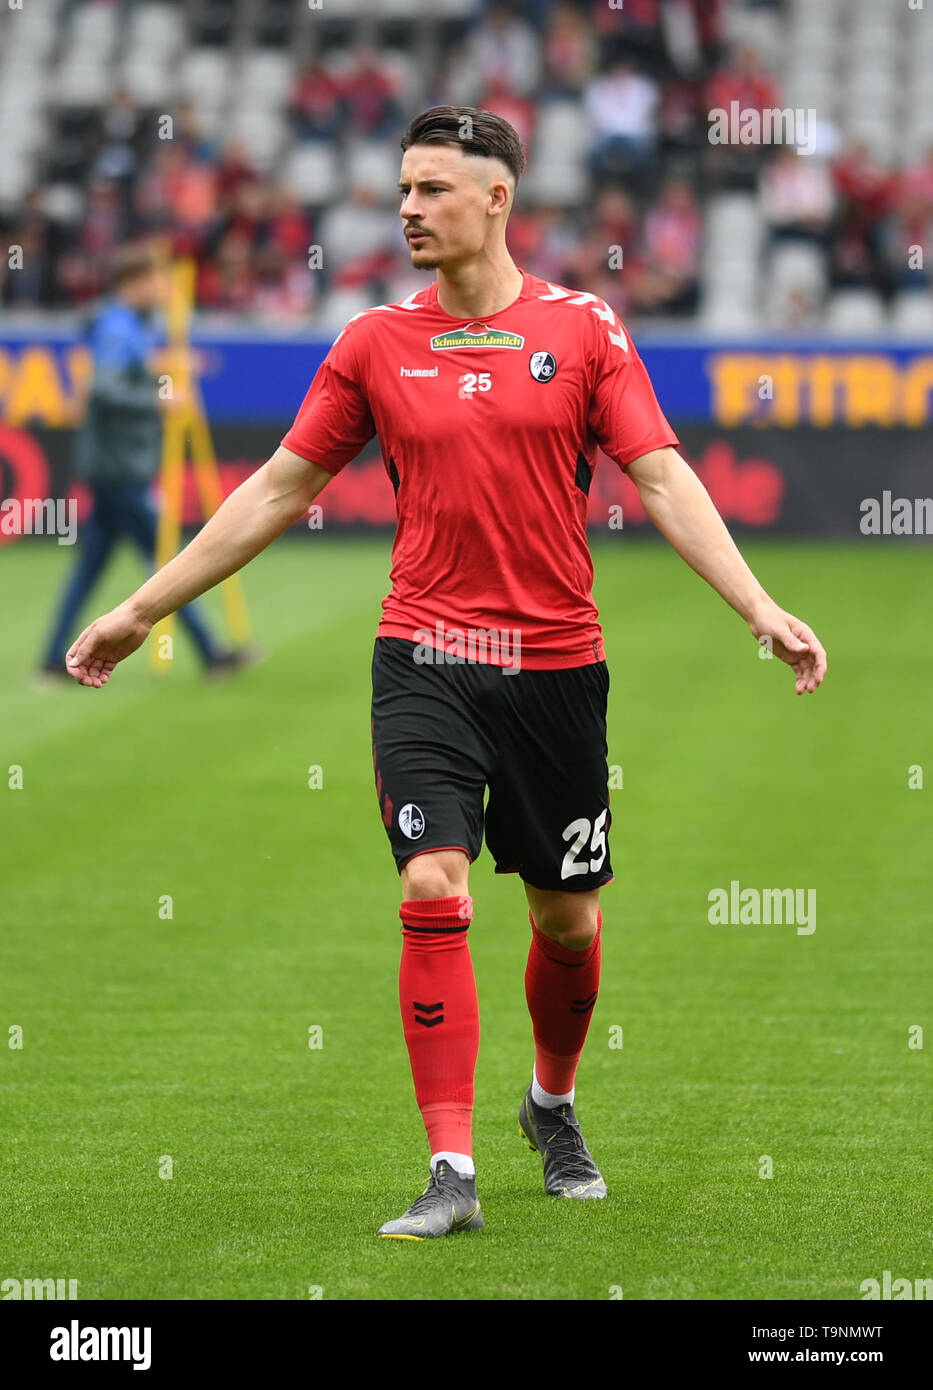 Freiburg, Germany. 18th May, 2019. Soccer: Bundesliga, SC Freiburg - 1st FC  Nuremberg, 34th matchday in the Schwarzwaldstadion. Robin Koch from Freiburg  is warming up. Credit: Patrick Seeger/dpa - Use only after